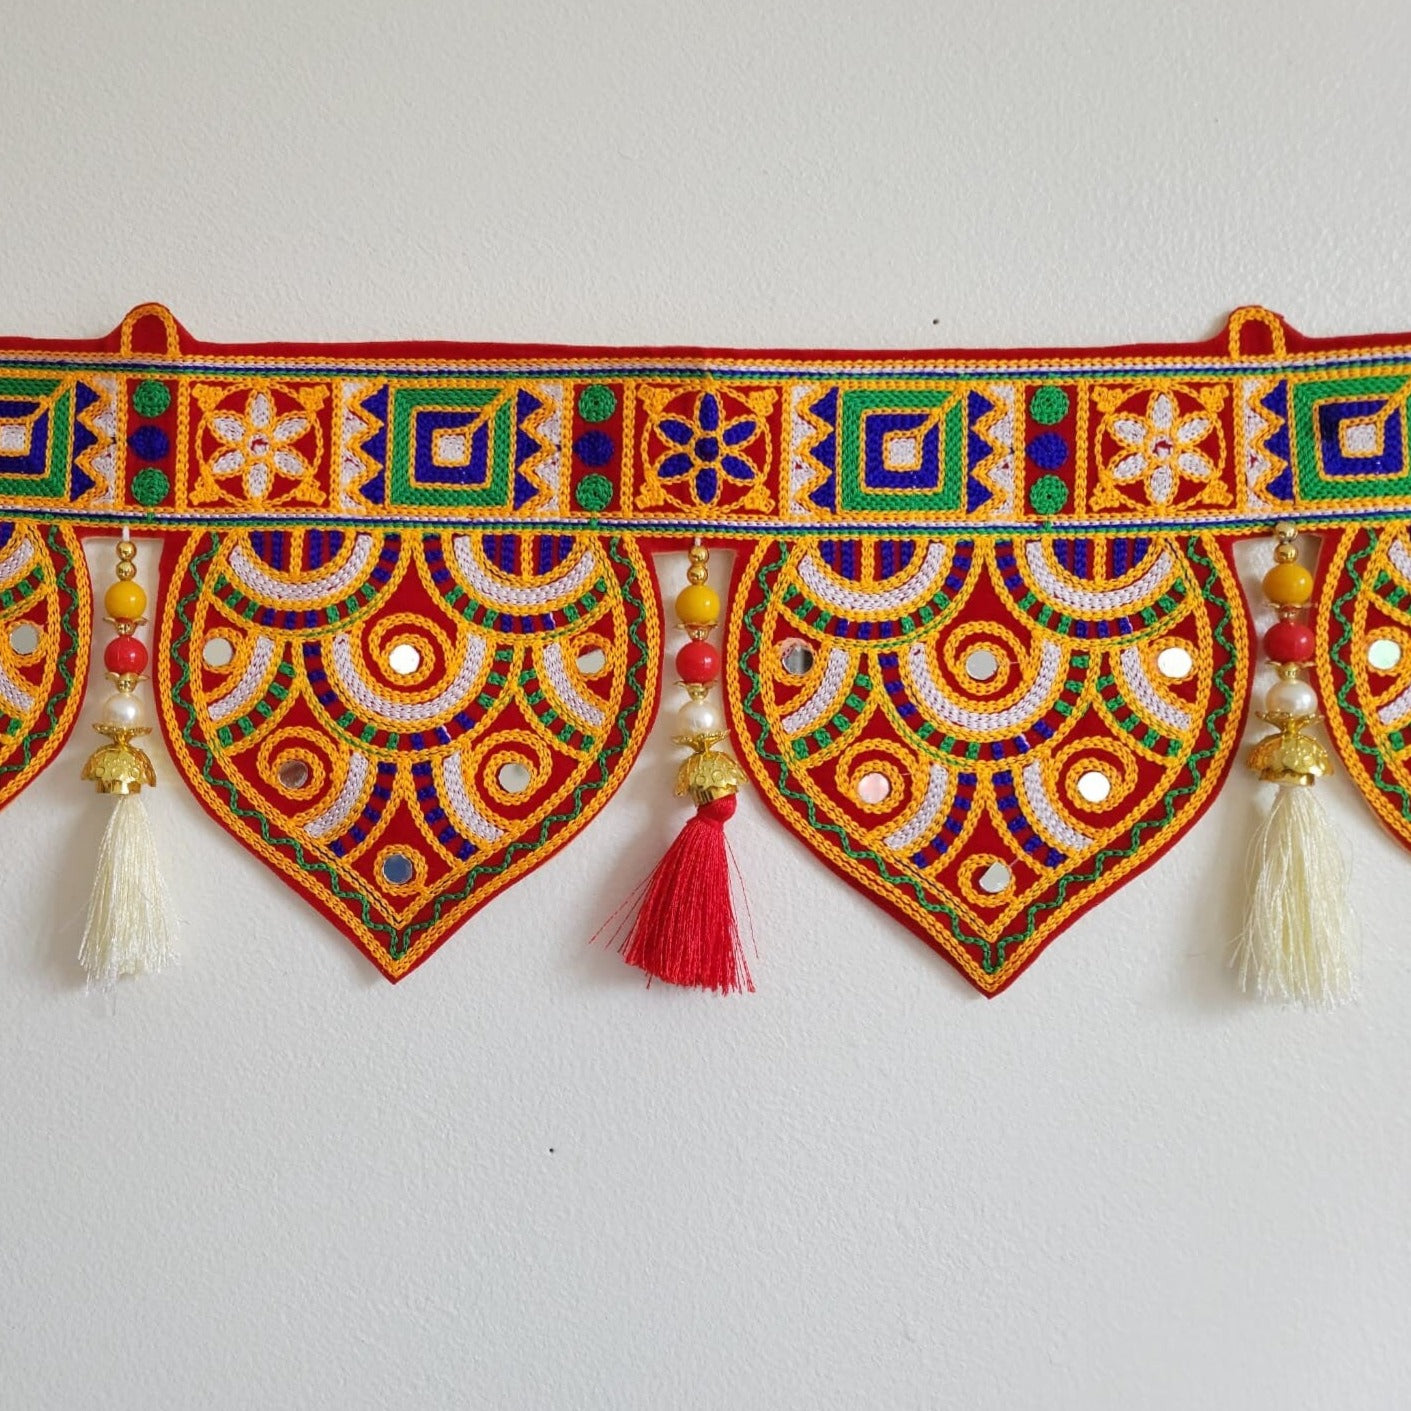 Bohemian unique bring toran for home decoration with colorful silk tassels, embroidered gypsy curtain, hippie door frame, Indian handmade ethnic tapestry. Great gift and decor for Diwali, house warming and auspicious events